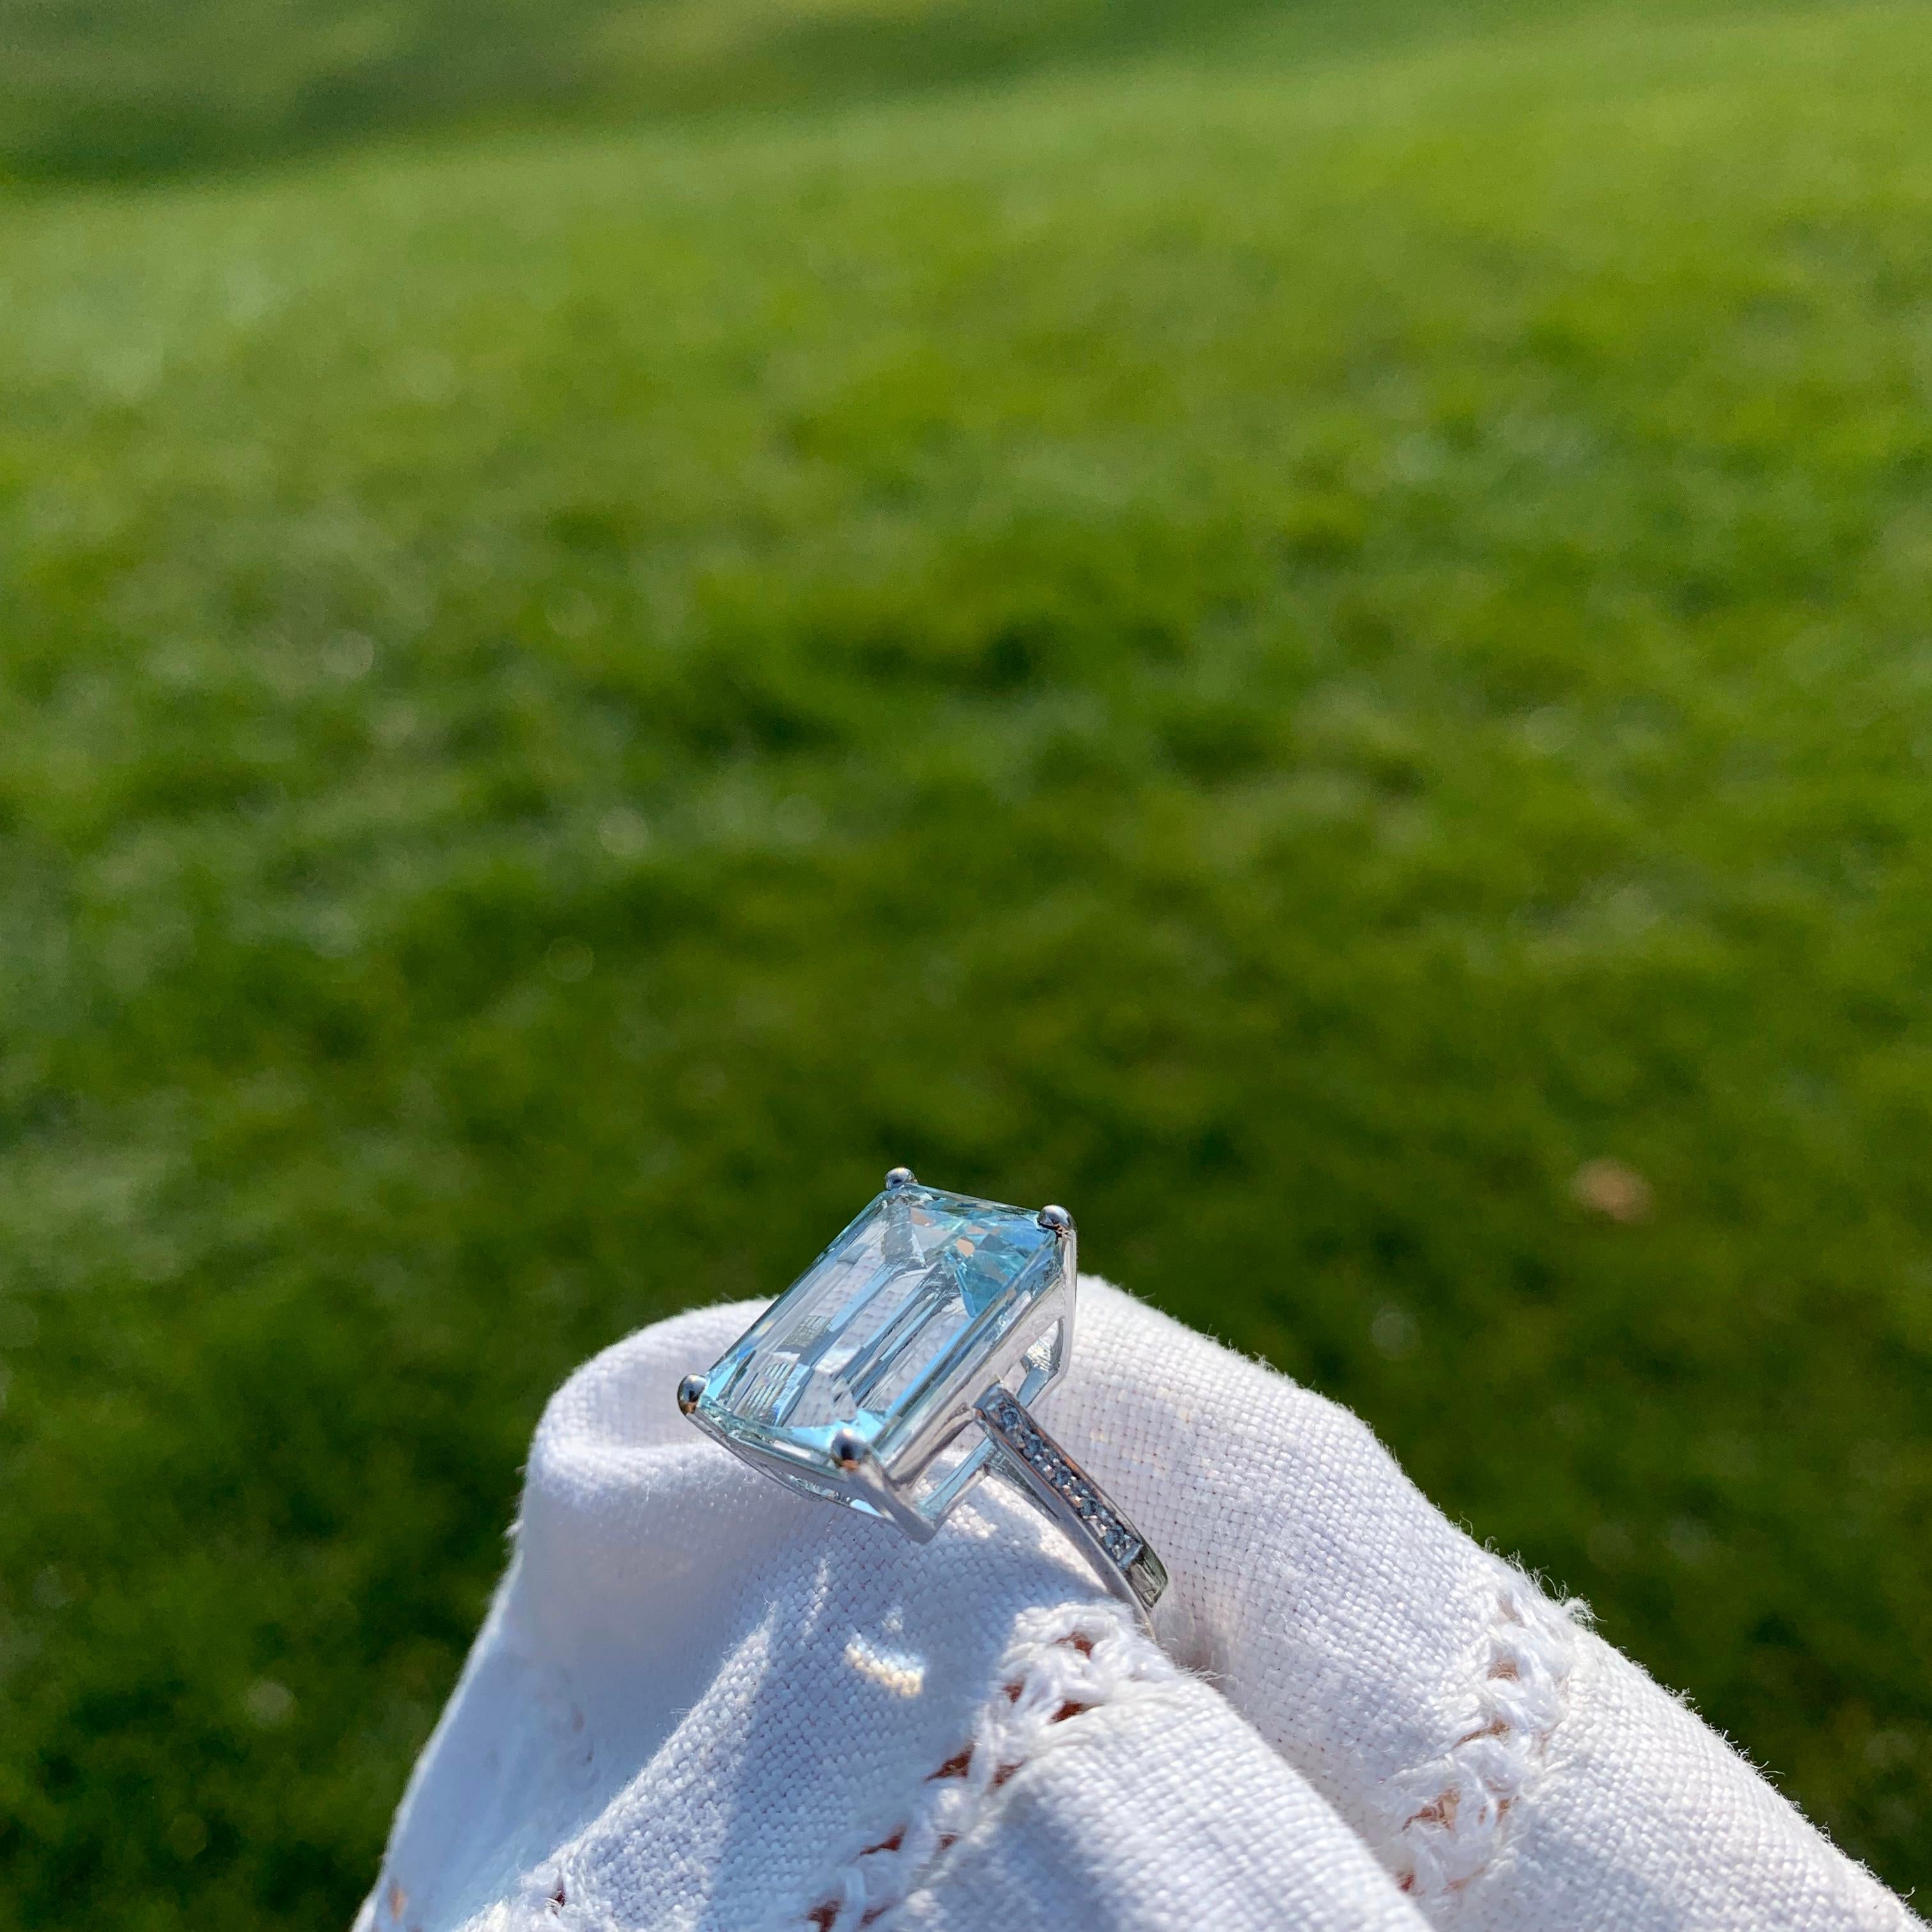 -Handmade in our 150 year old workshop South of Rome, Italy
-8ct Handcut Aquamarine
-This made to order for your size but approximately 5.30gr 18kt White Gold
-10 White VVS-F Diamond (0.08ct)

An impressive 8ct Aquamarine is at the centre of this